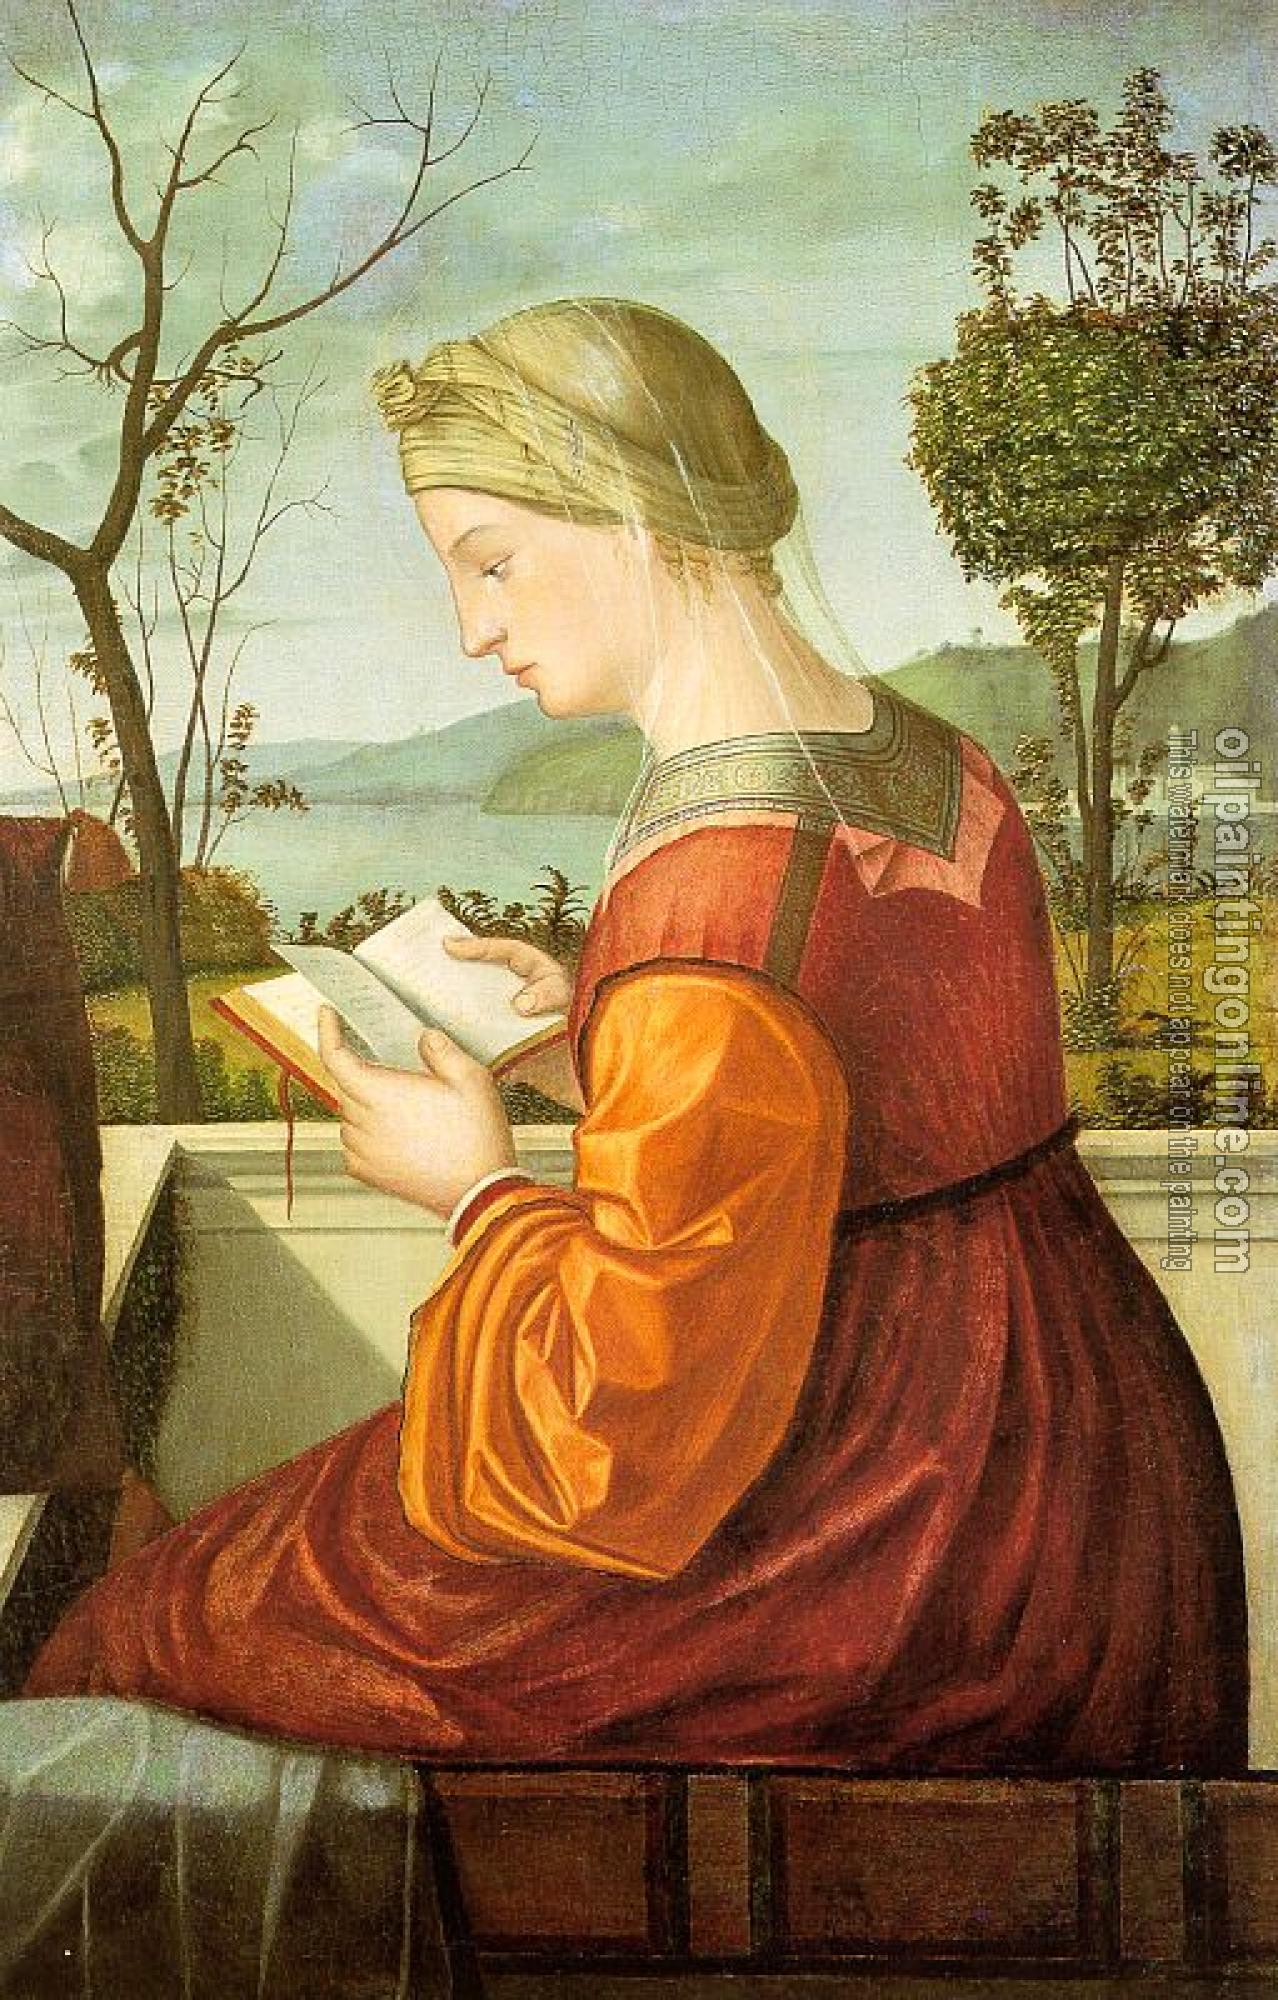 Carpaccio - The Virgin Reading, possibly a fragment of a much larger work